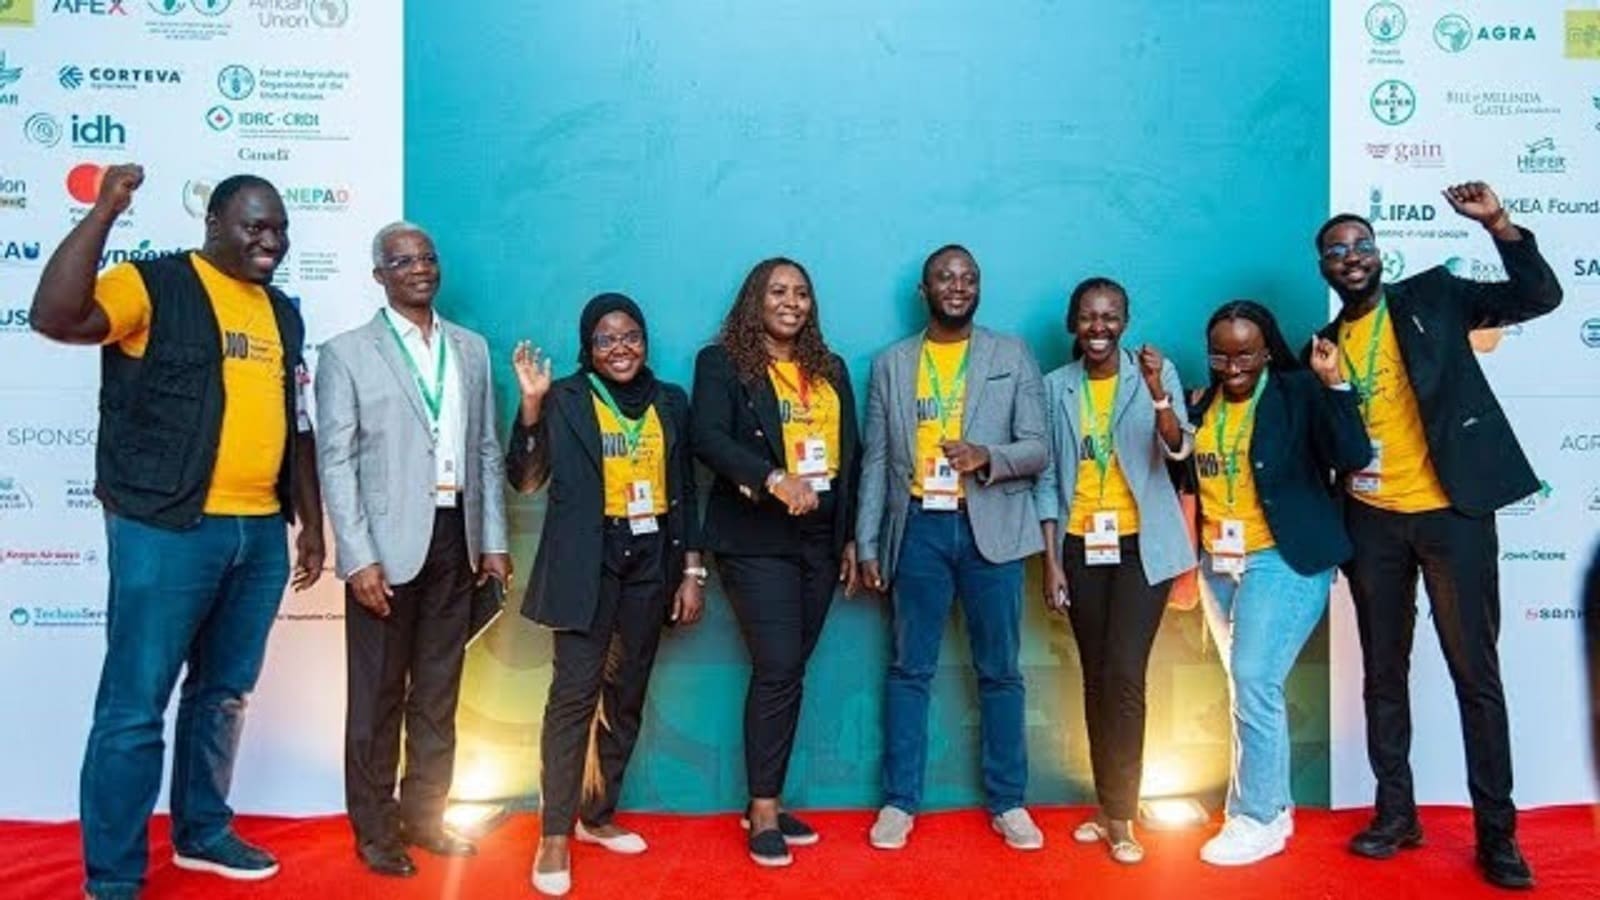 AFEX calls for streamlined trade during AGRF 2023, hints at Cote d’Ivoire expansion 